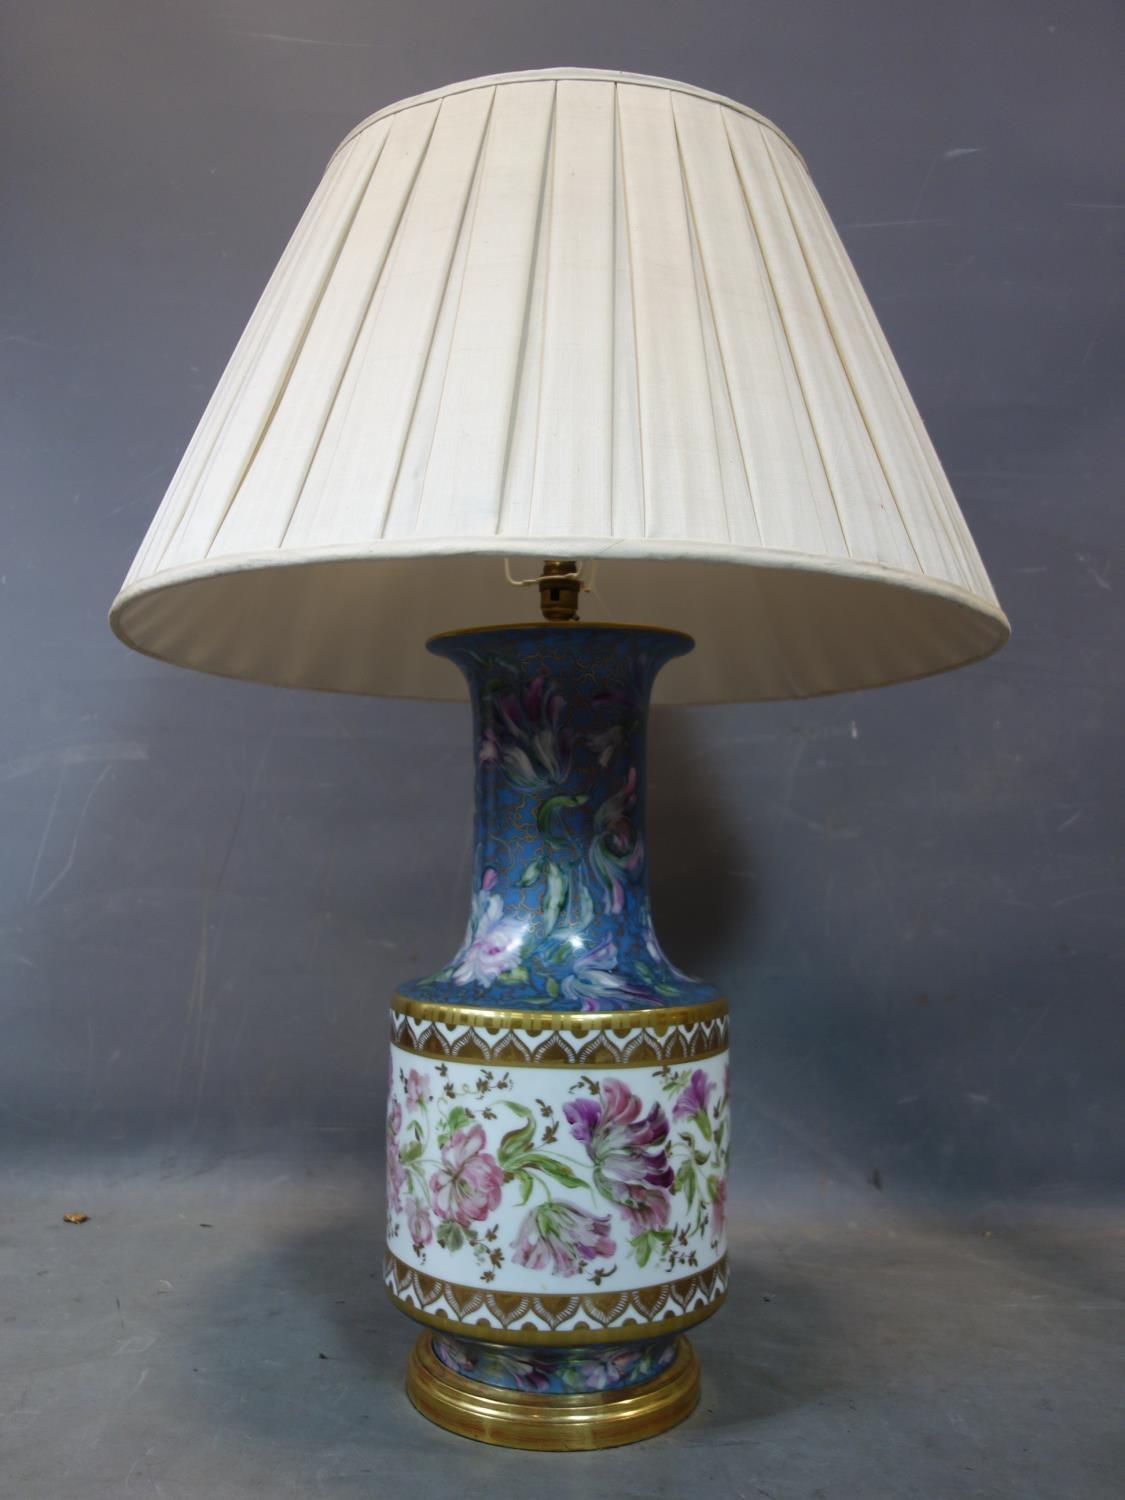 A large 20th century porcelain lamp, hand painted with flowers and gilt, possibly by Limoges, with